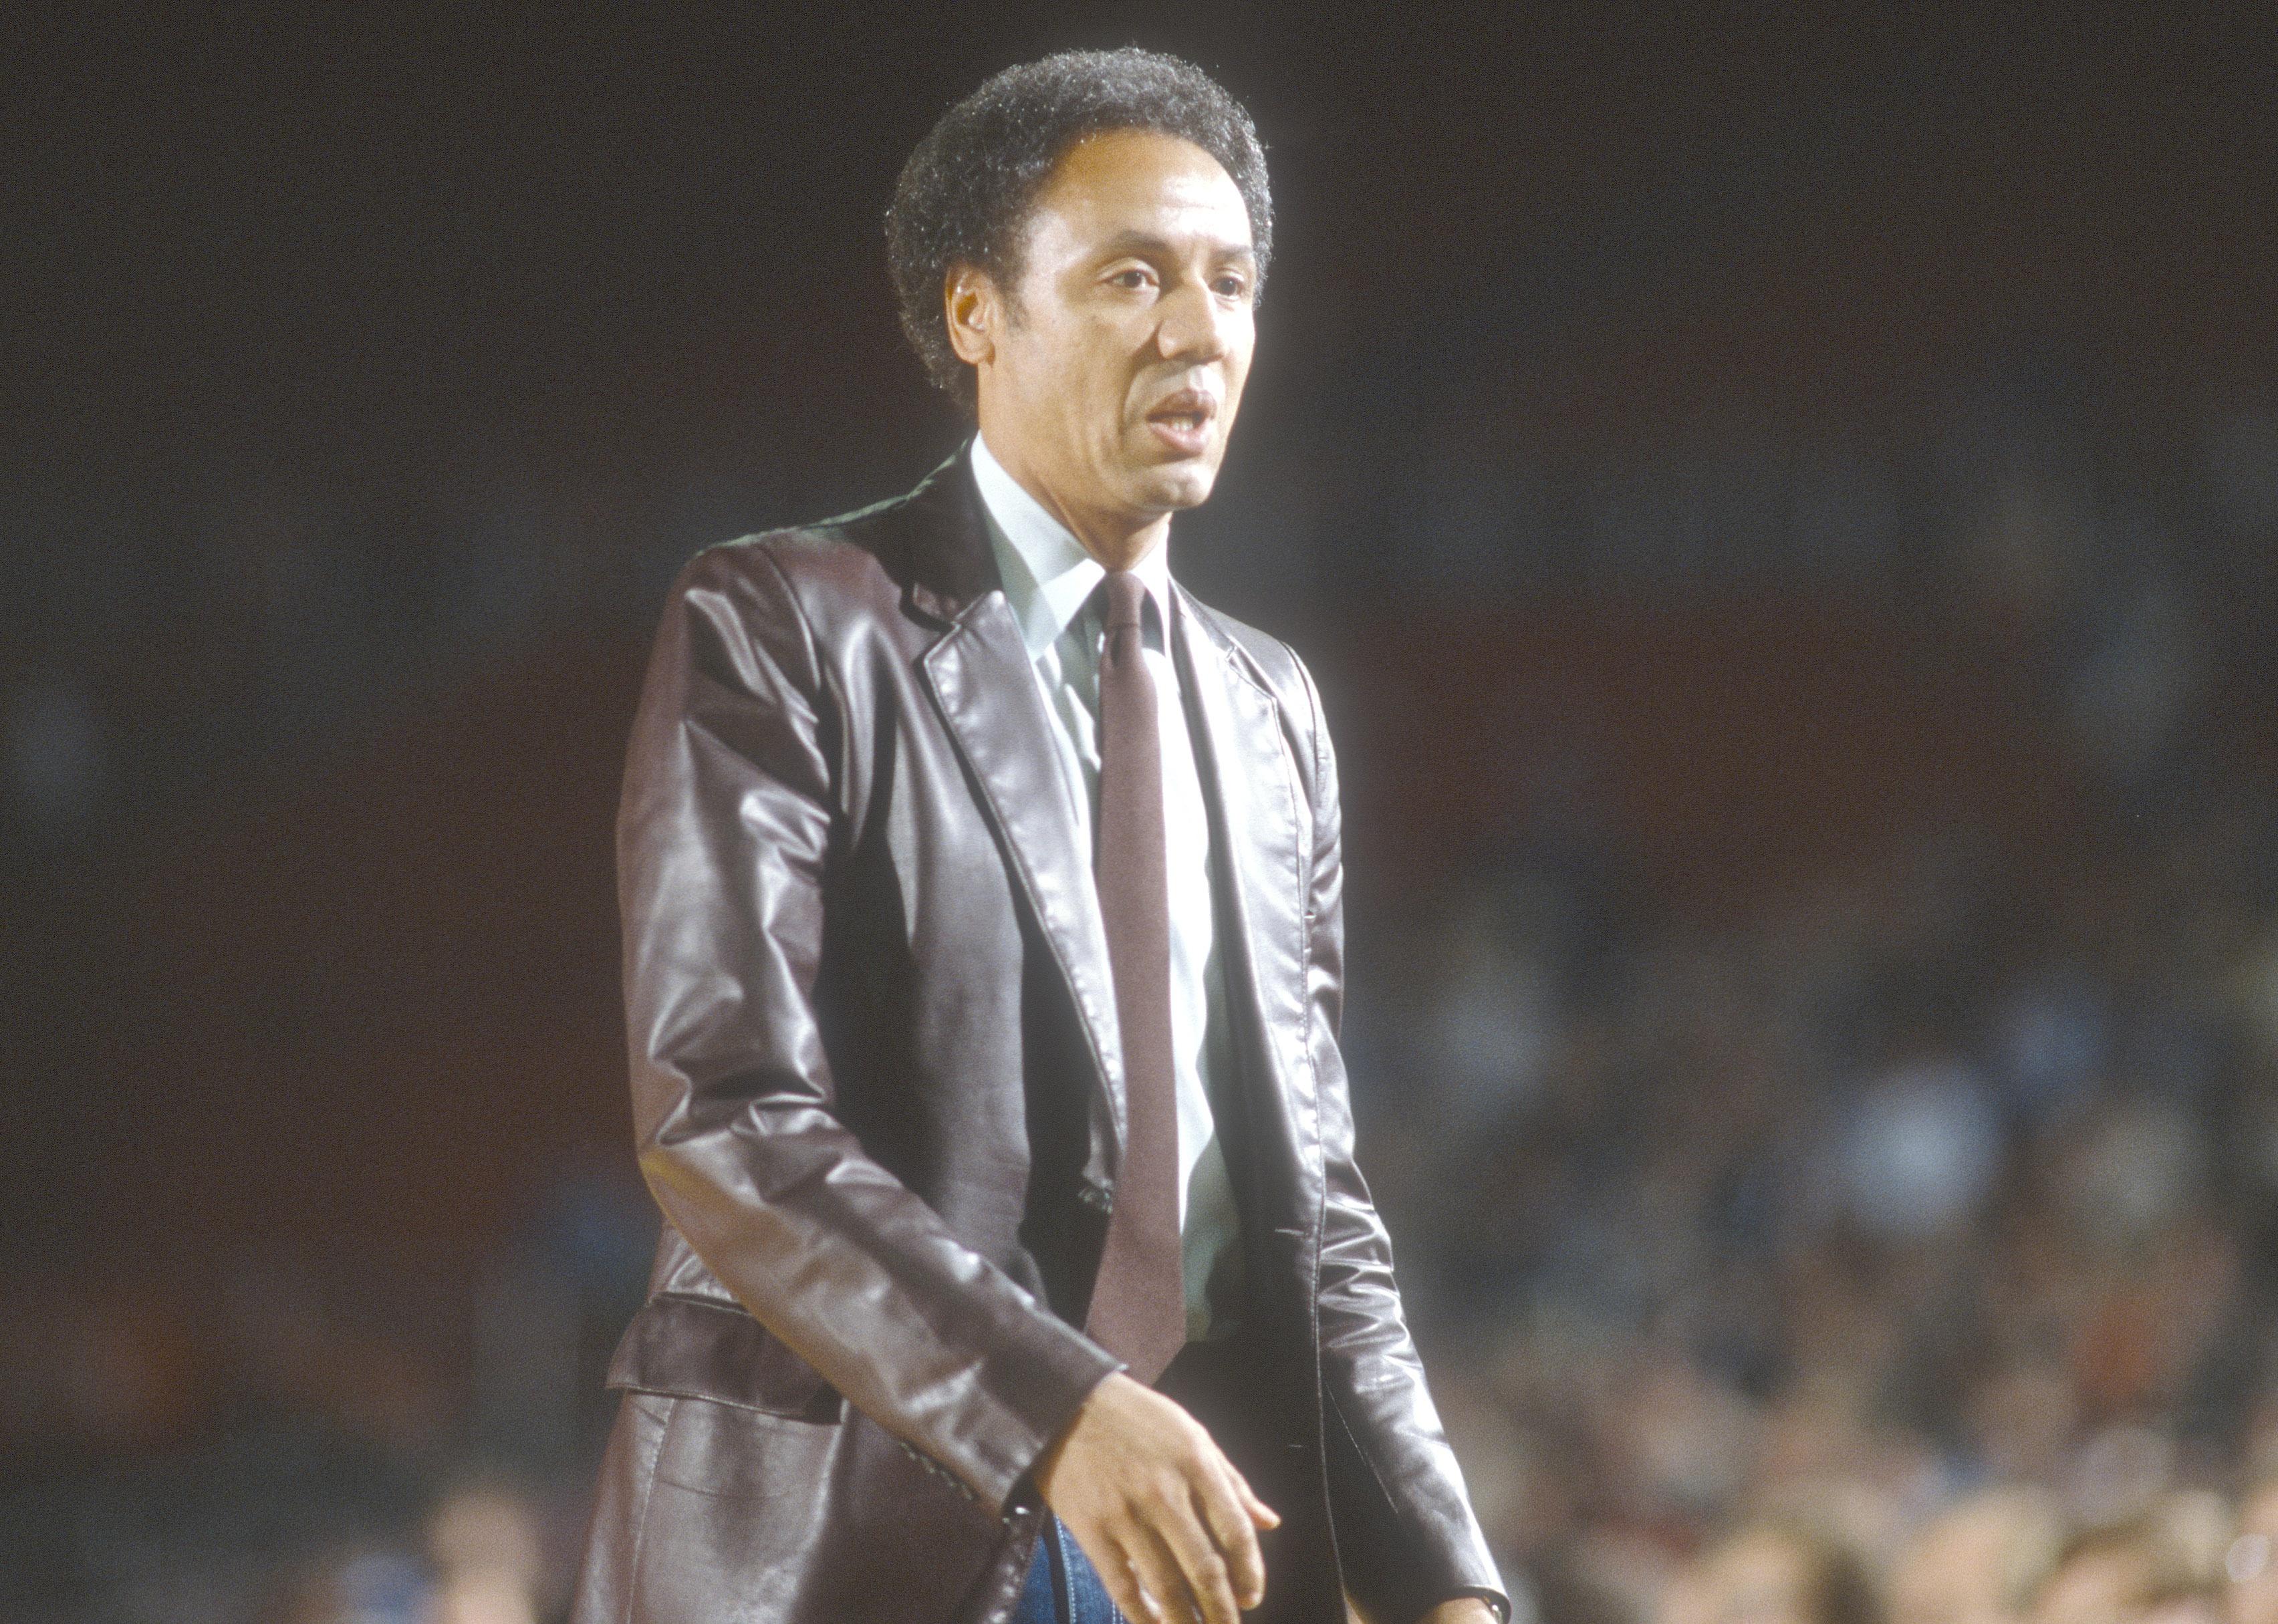 Head coach Lenny Wilkens of the Seattle Supersonics looks on during a game.